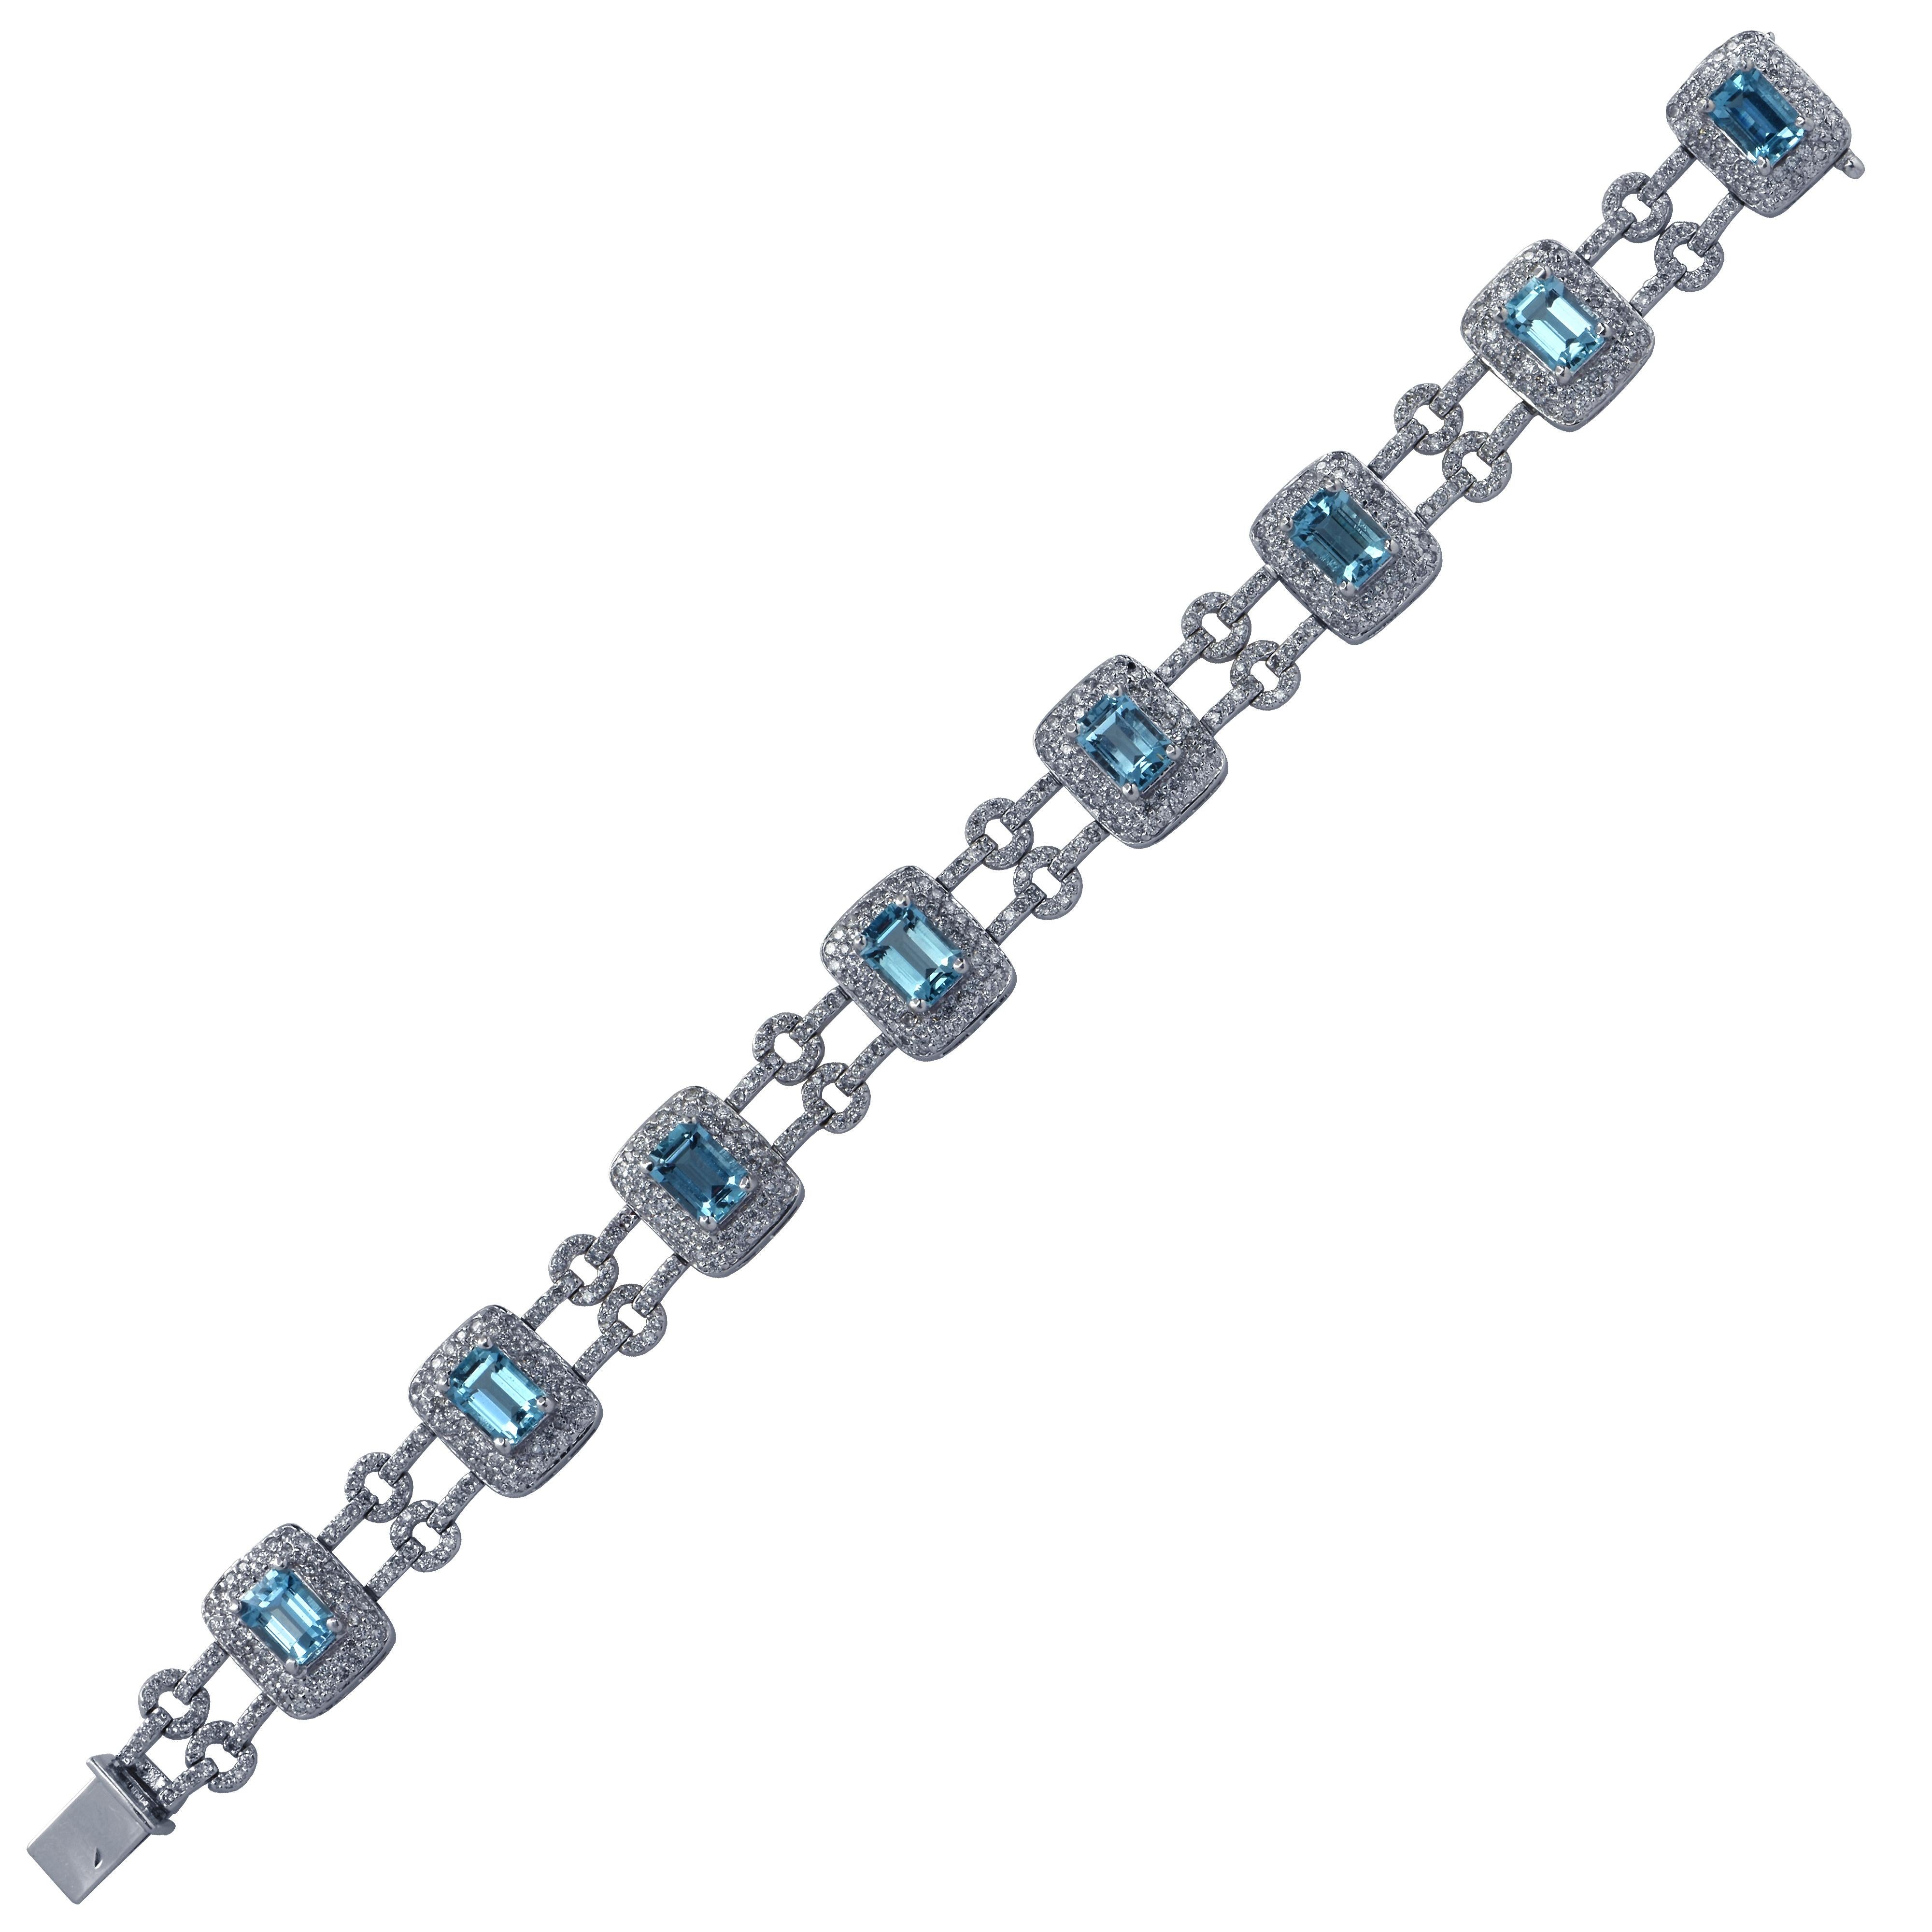 Beautiful bracelet crafted in 18 karat white gold, showcasing 8 emerald cut Aquamarines weighing approximately 8.25 carats total accented by 640 round brilliant cut diamonds weighing approximately 3.20 carats total G color VS clarity. Each